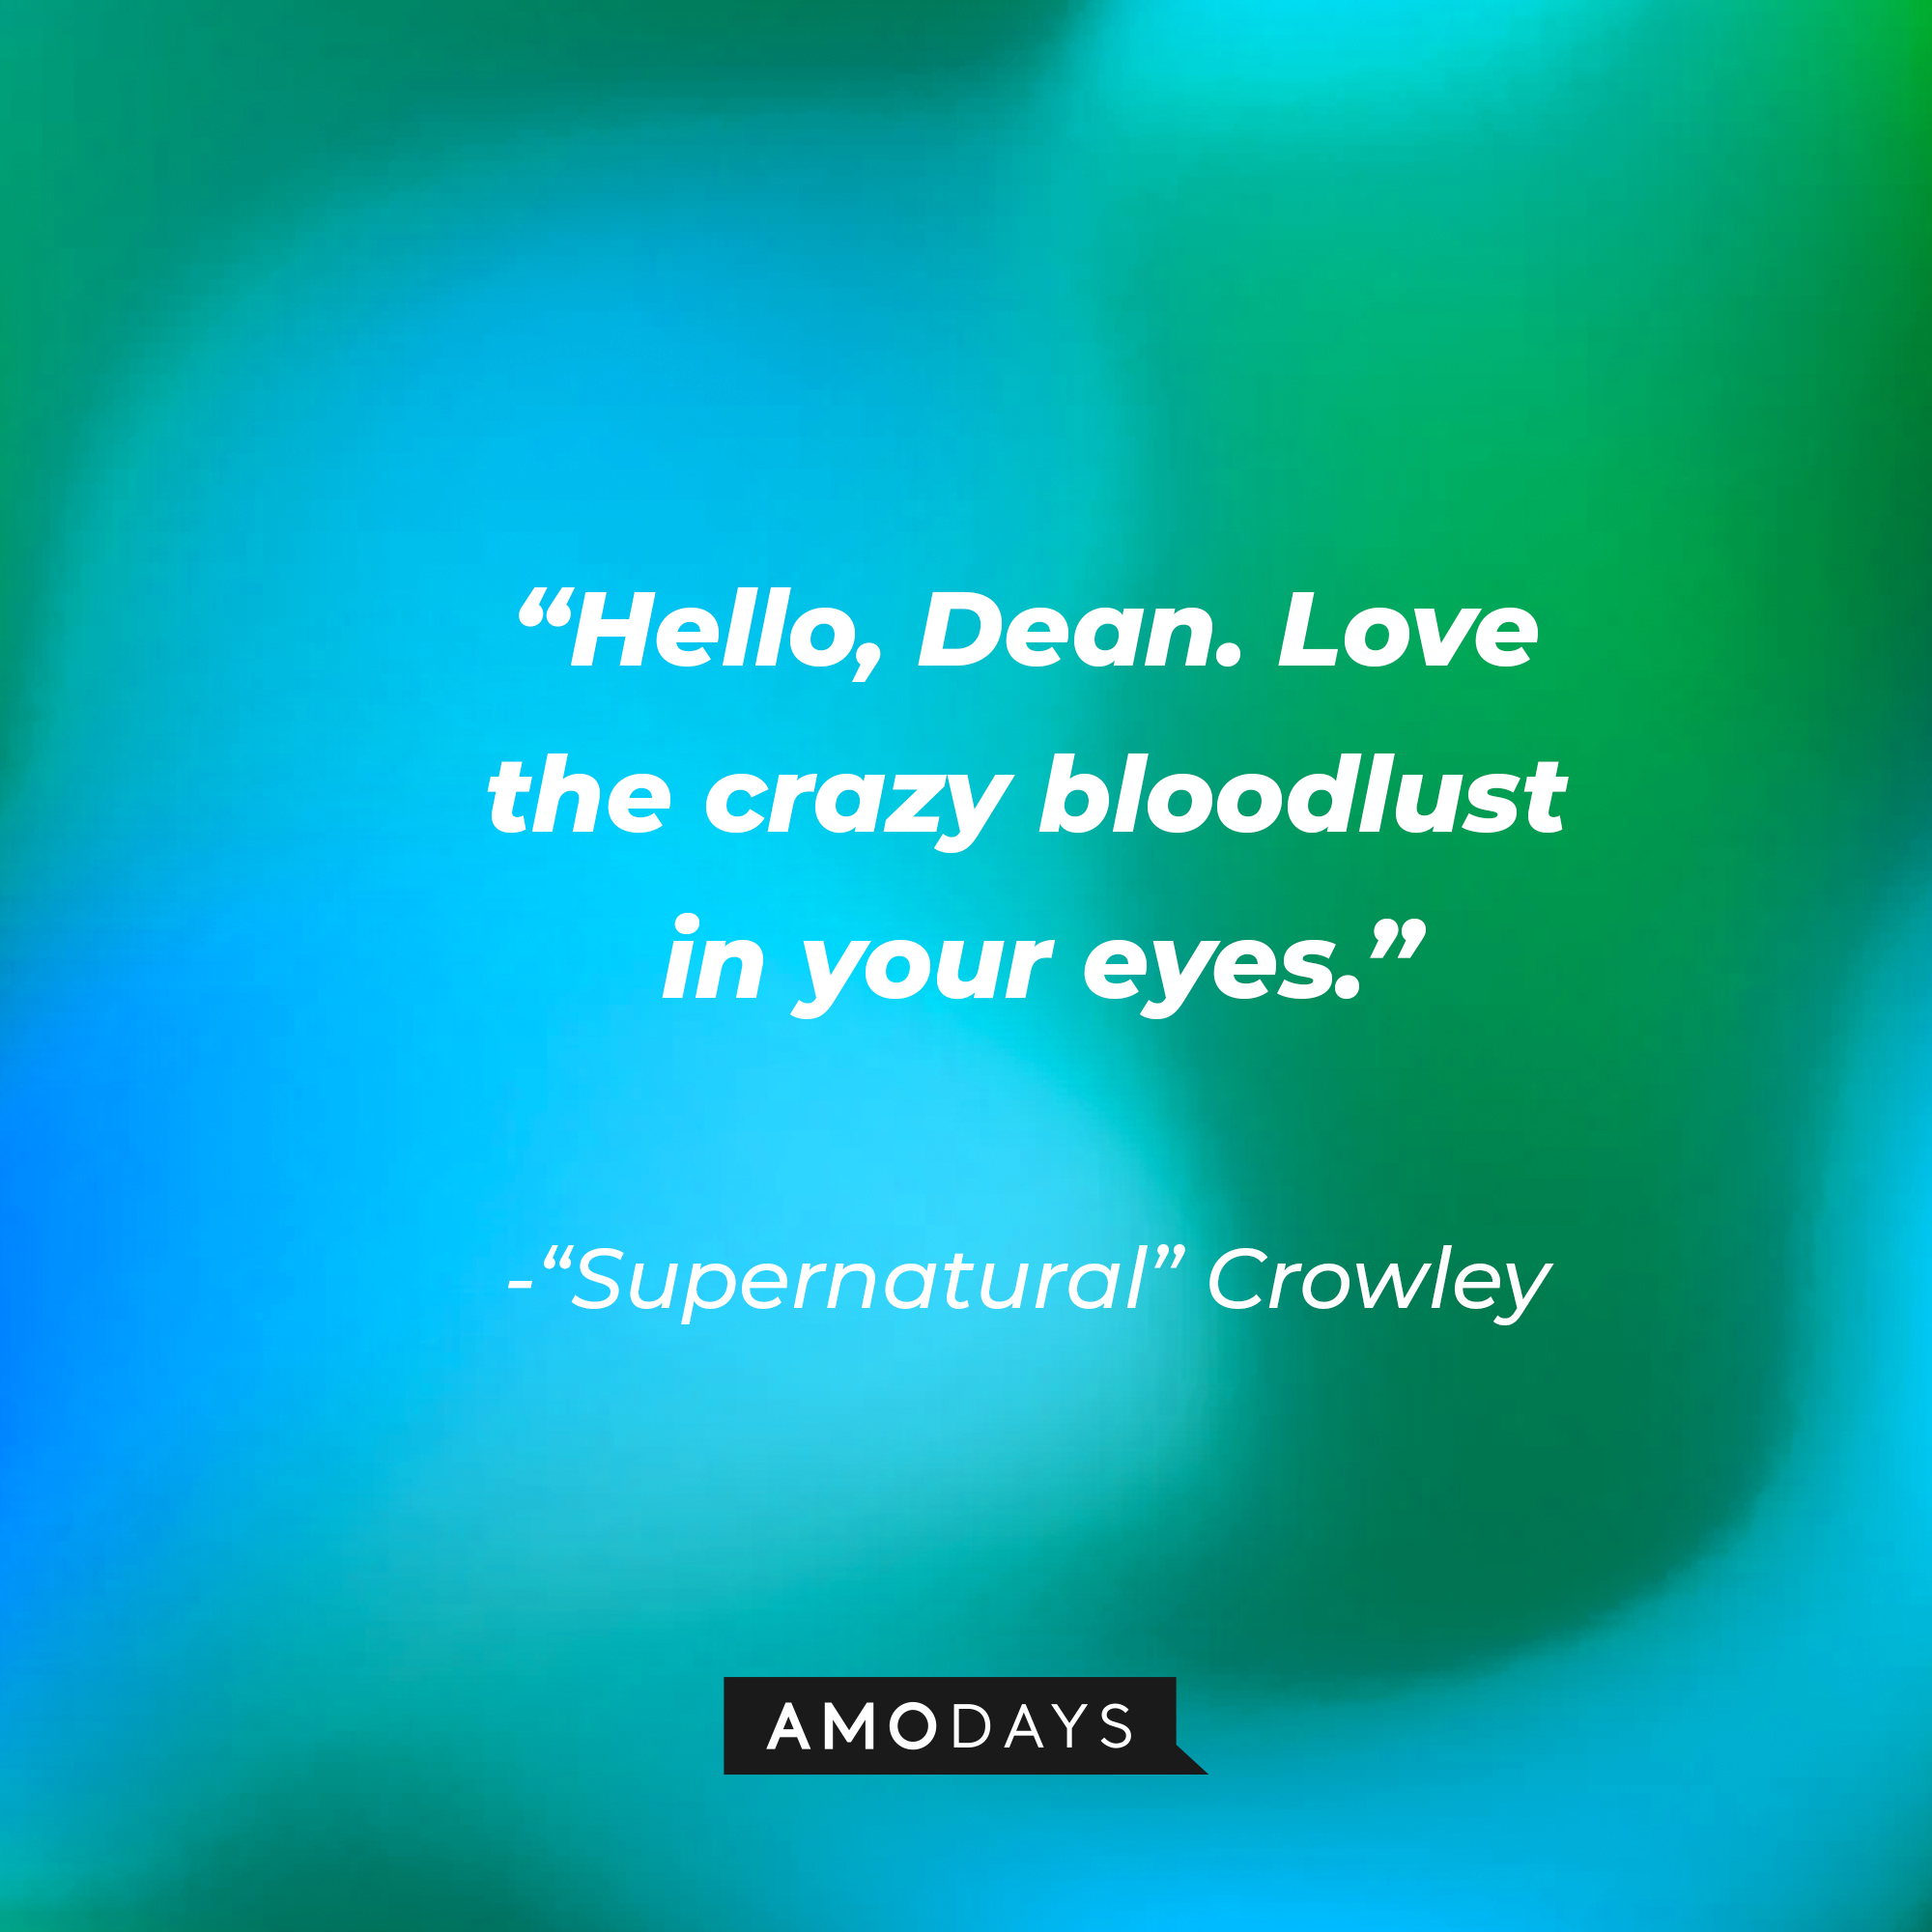 "Supernatural" Crowley's quote: "Hello, Dean. Love the crazy bloodlust in your eyes." | Source: AmoDays